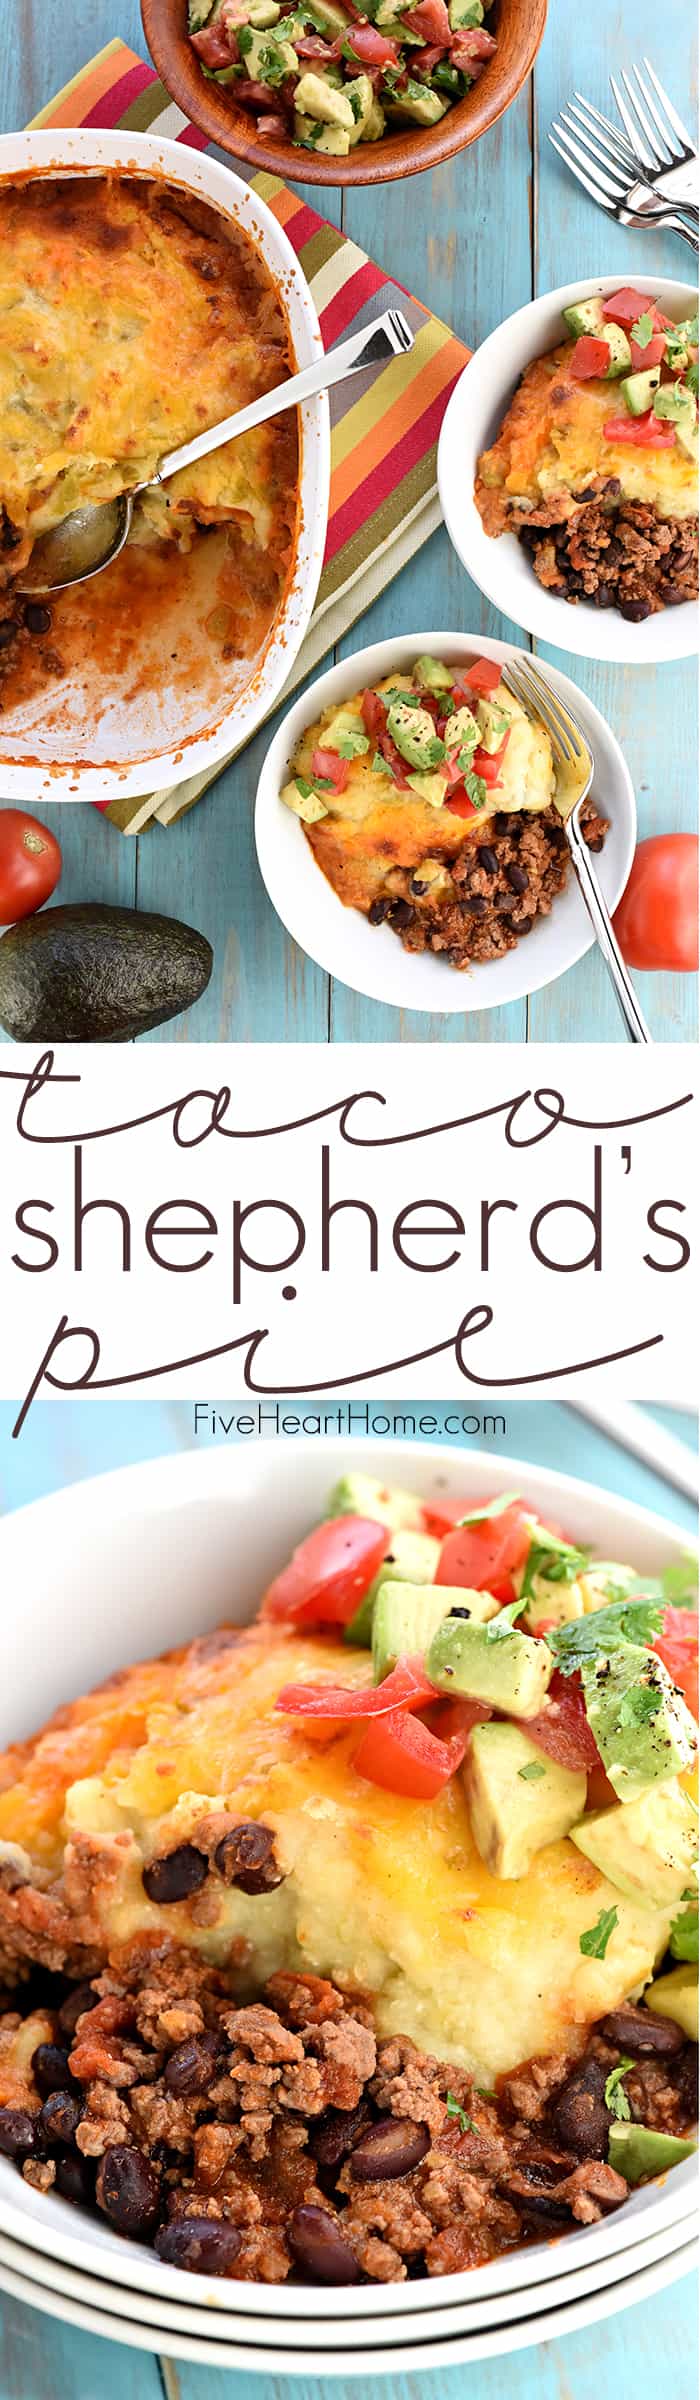 Taco Shepherd's Pie ~ a comfort food classic gets a Tex-Mex twist with taco-seasoned, salsa-spiced ground beef, studded with black beans and topped with cheesy green chile mashed potatoes! | FiveHeartHome.com via @fivehearthome